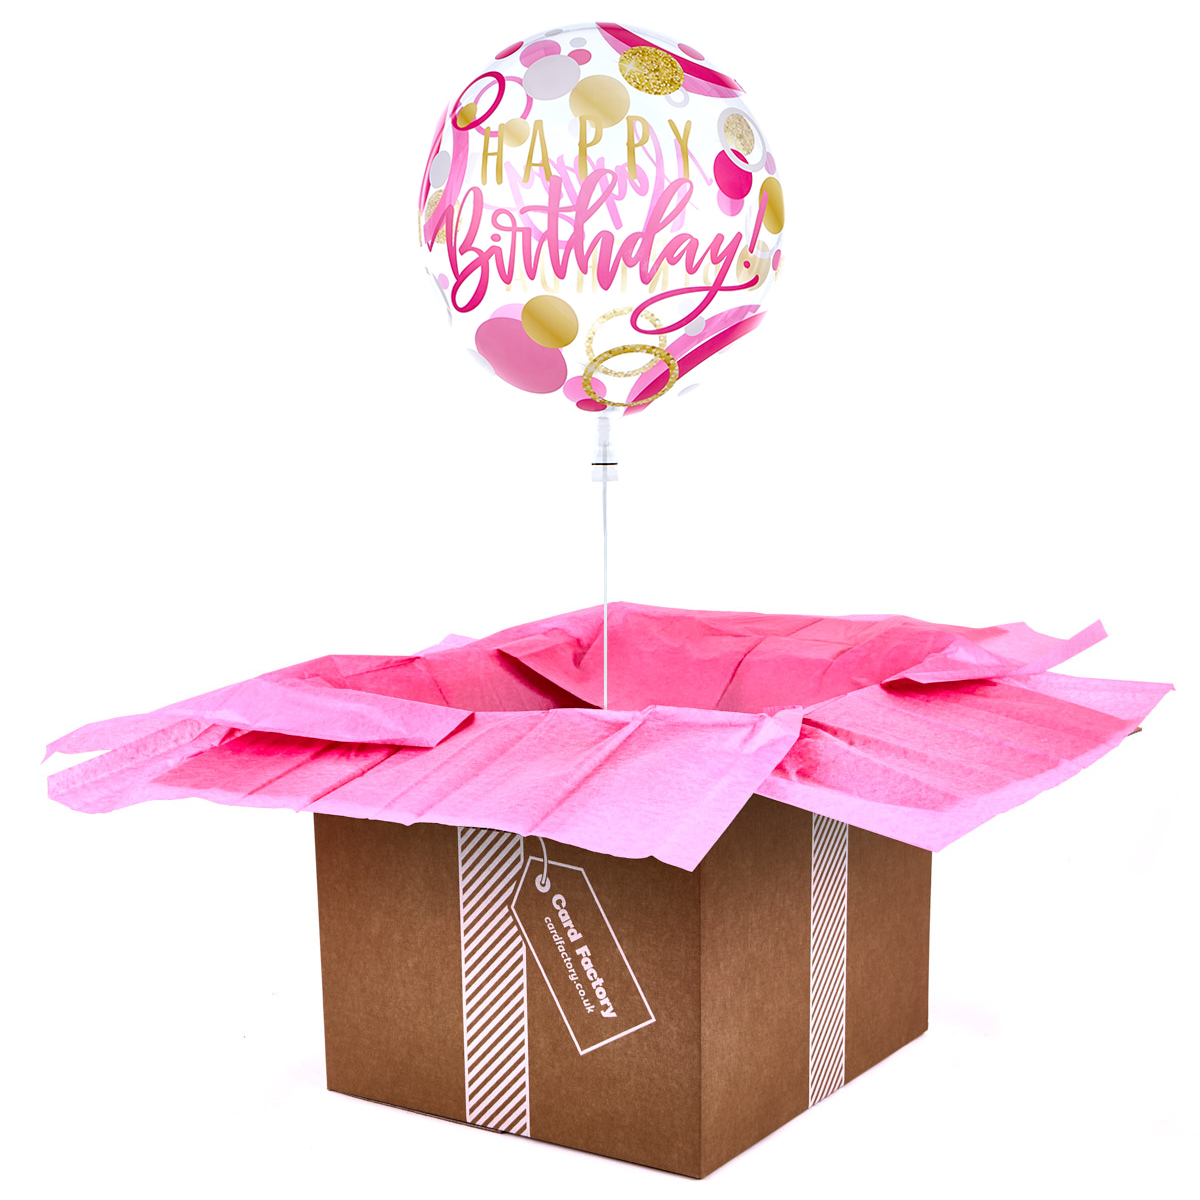 22-Inch Bubble Balloon - Happy Birthday, Pink & Gold Spots - DELIVERED INFLATED!